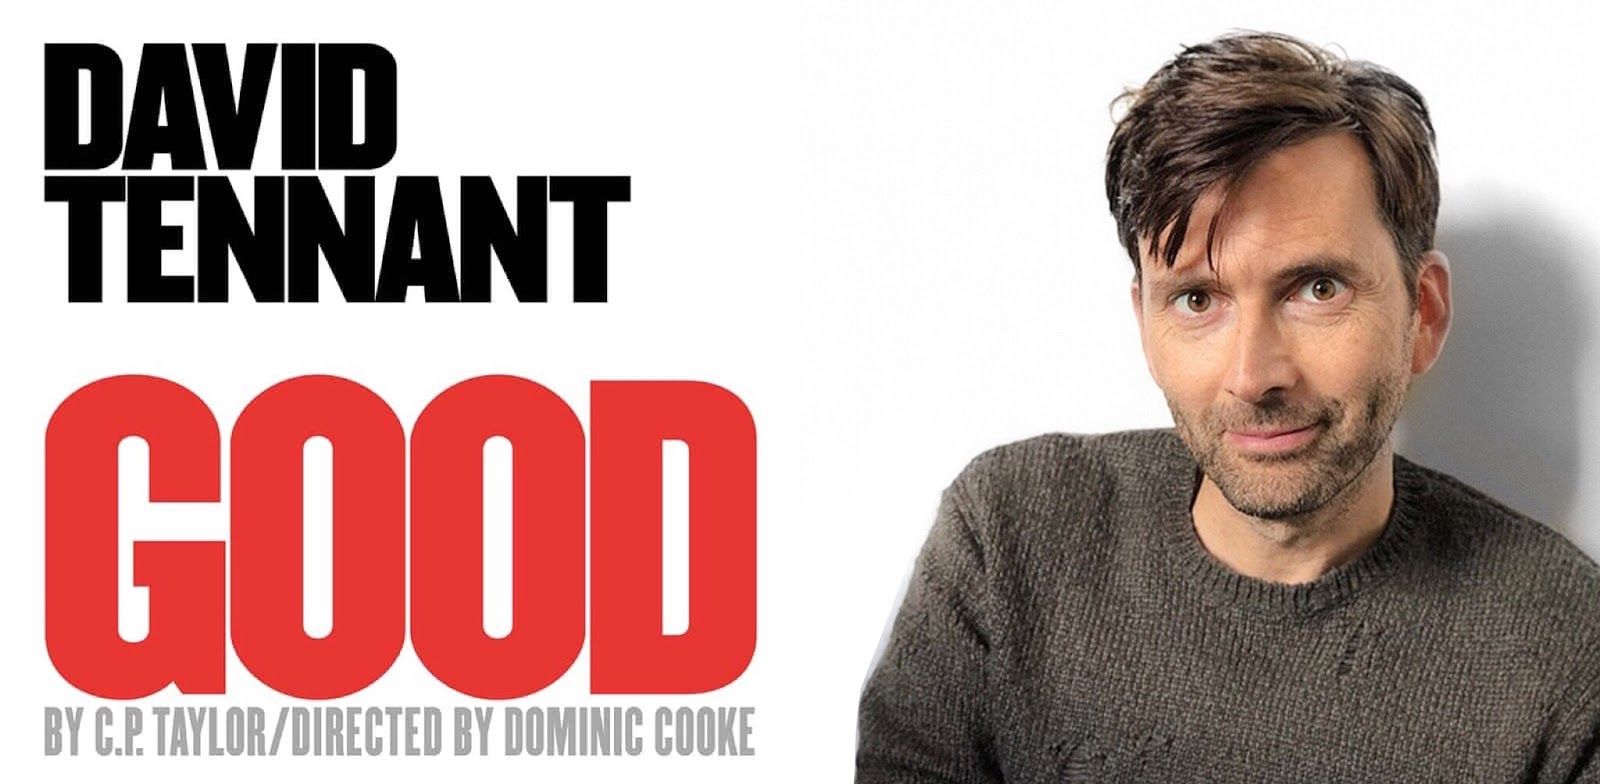 Dominic Cooke, an award-winning director, adapts this powerful, political play with David Tennant. Buy 'Good' play tickets.